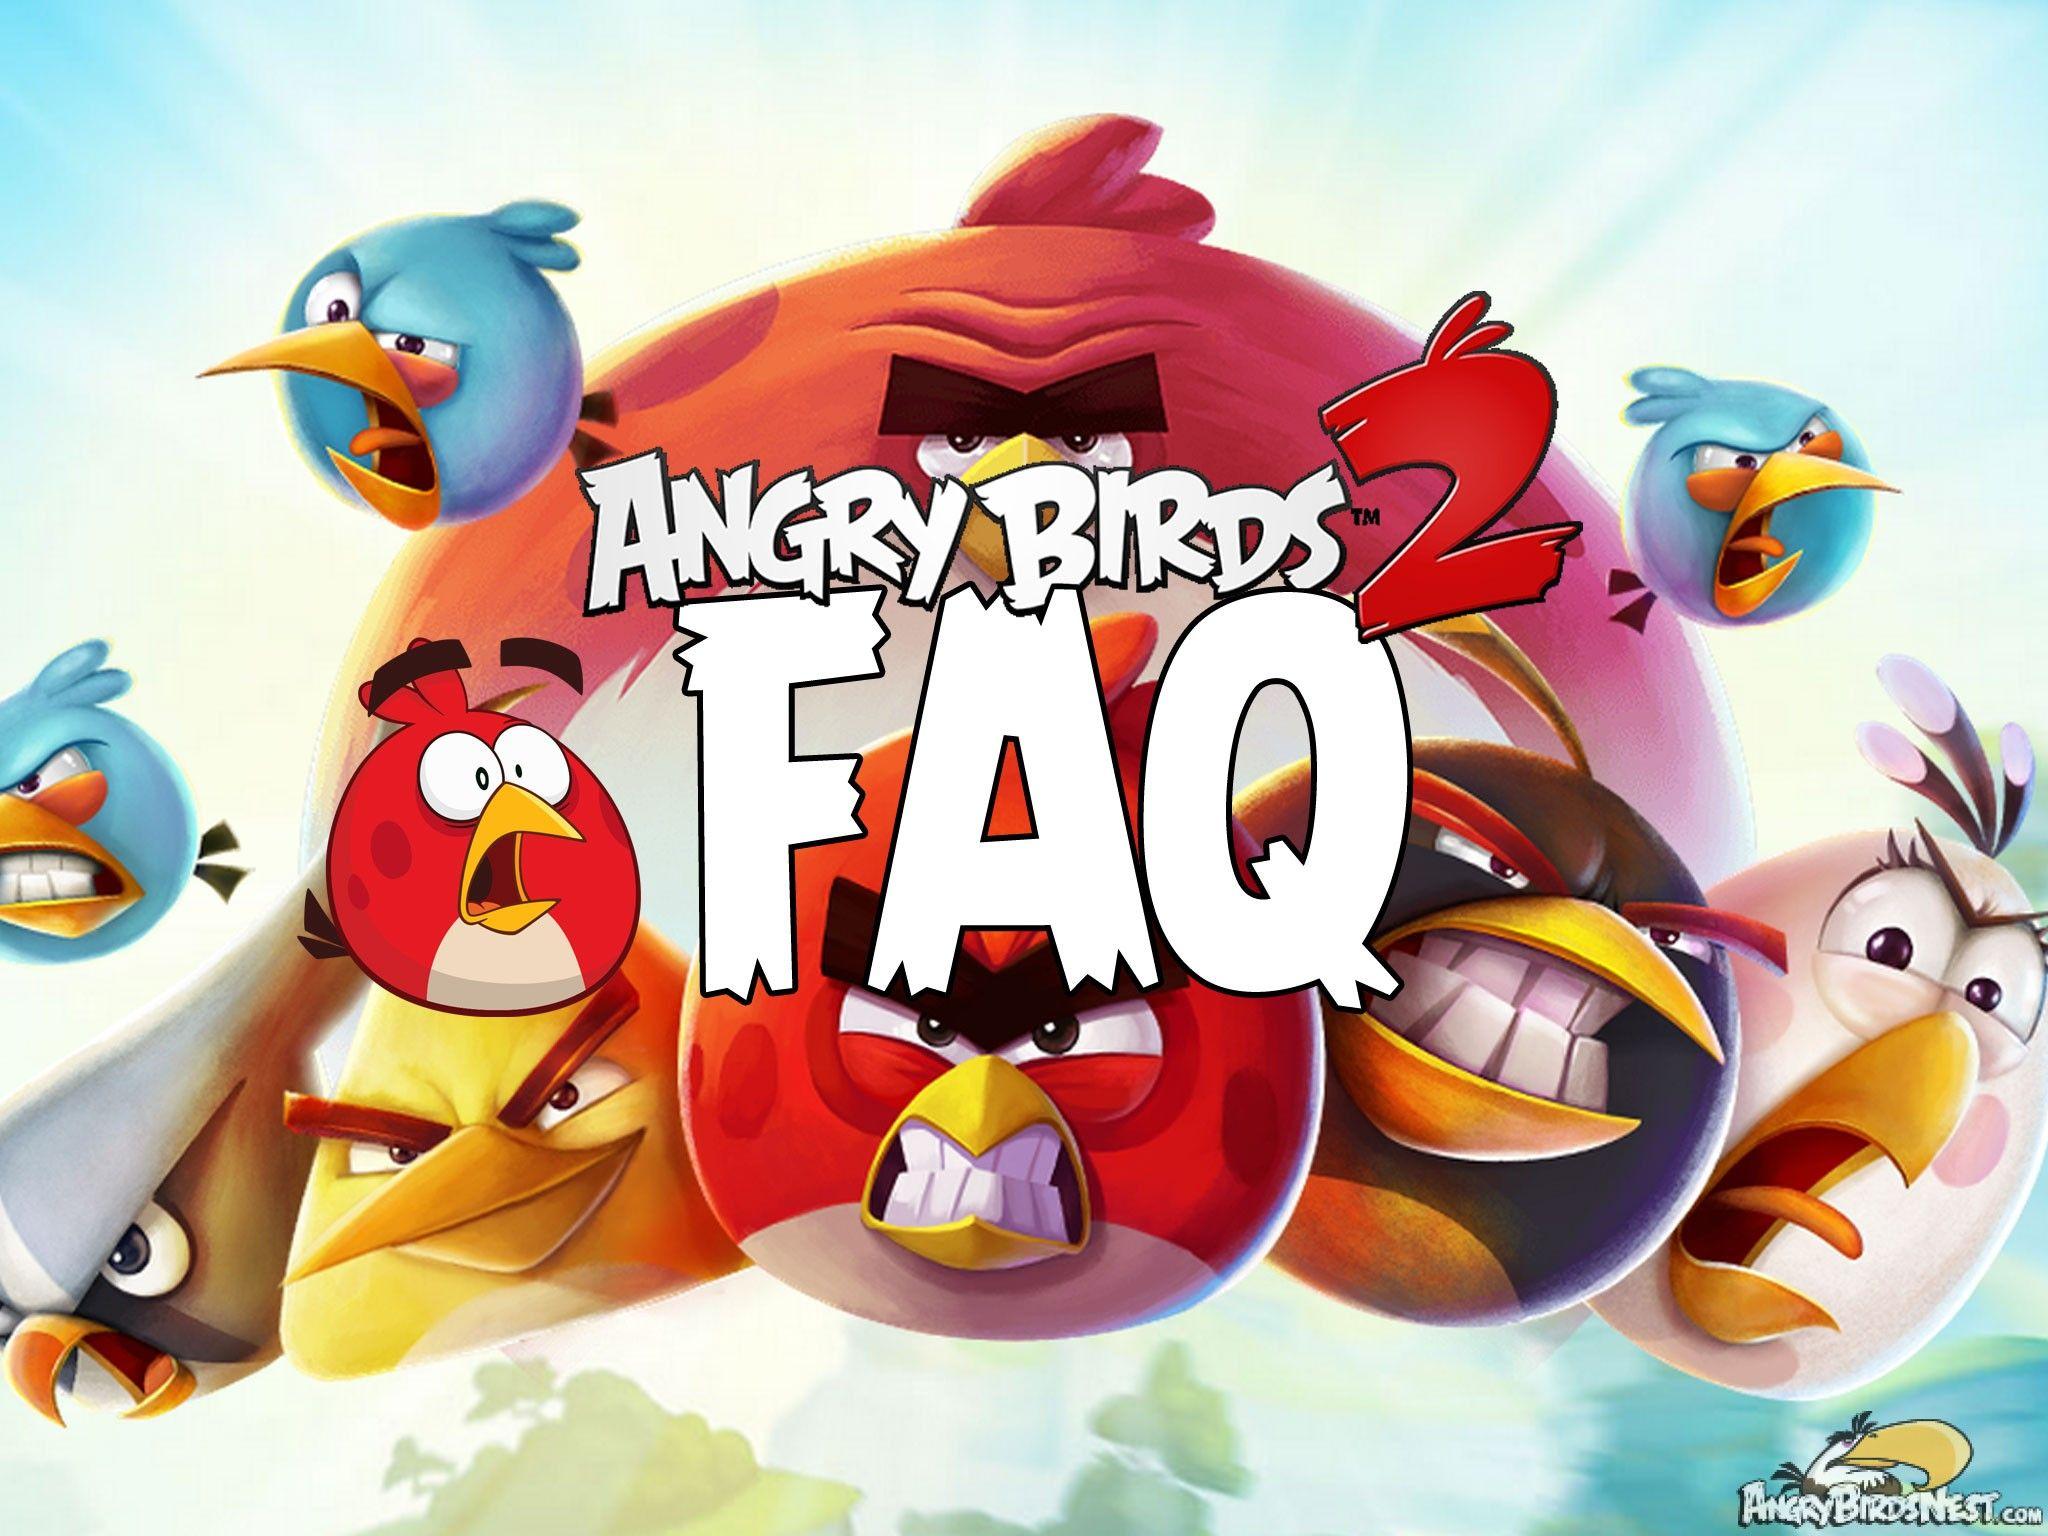 Angry Birds 2 FAQ (Frequently Asked Questions)